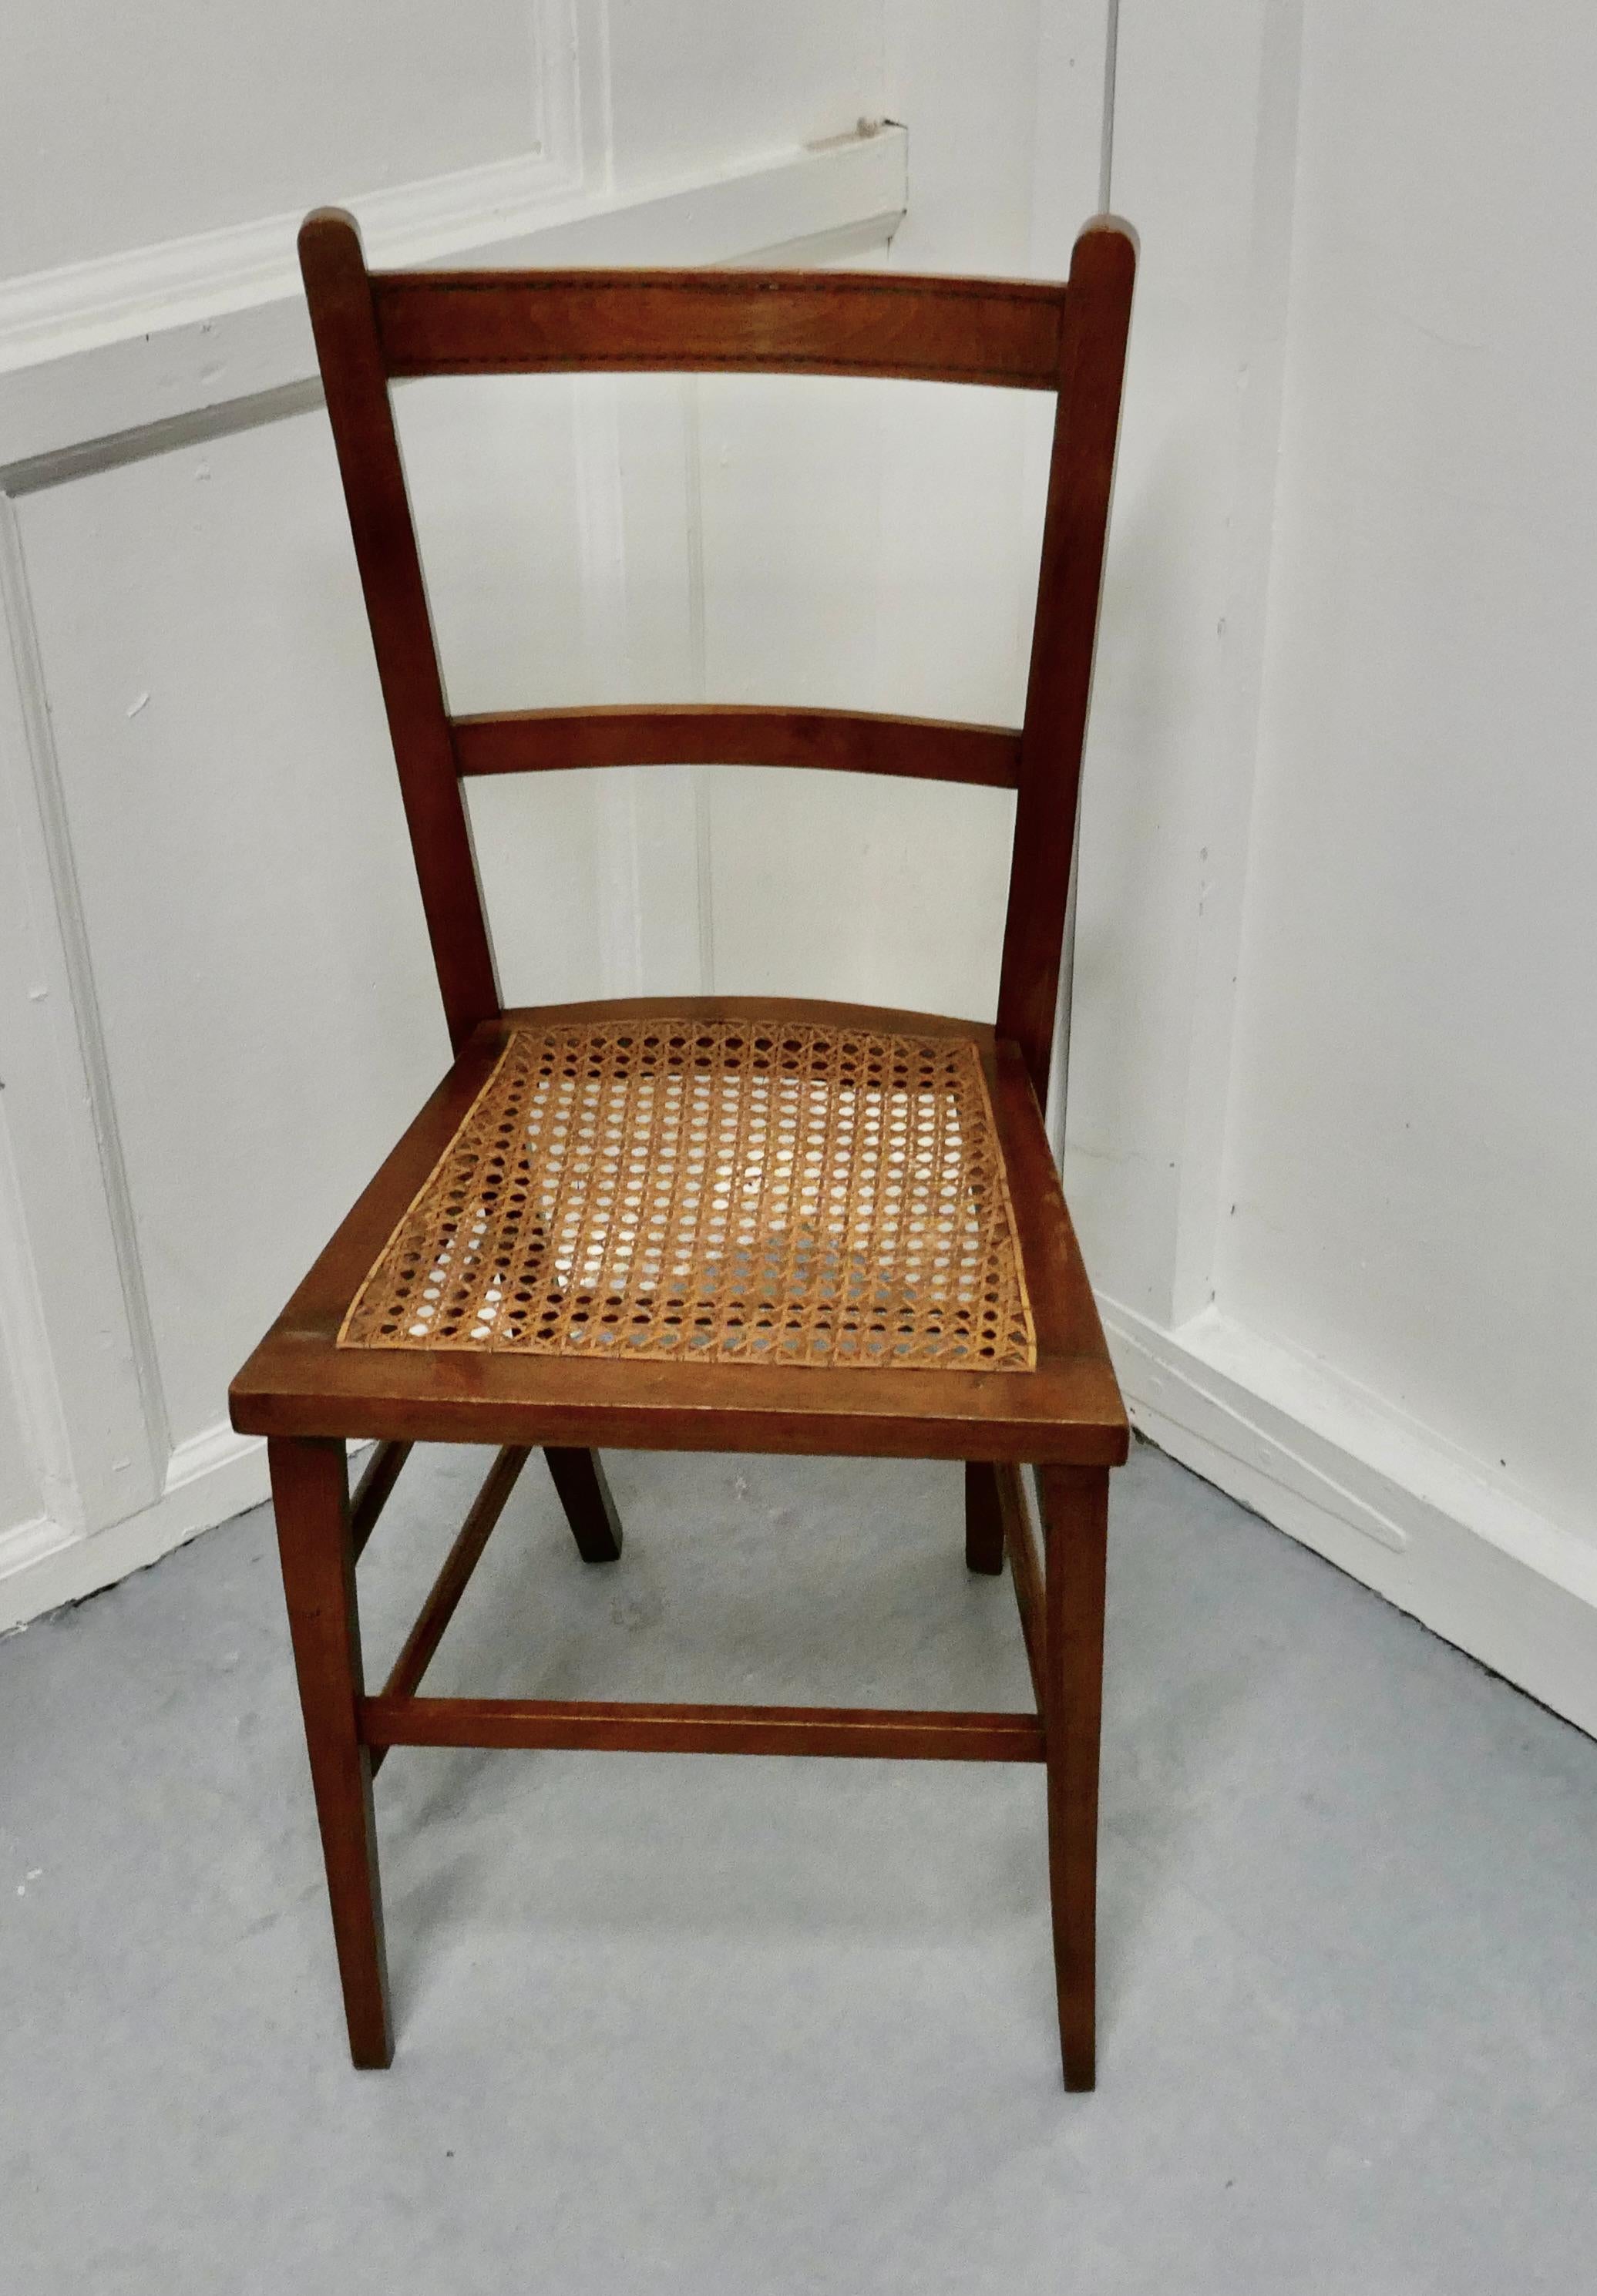 Inlaid beech and cane bedroom chair

The chair has a traditional woven cane seat with an inlaid top rail and is in good sound condition
The back of the chair is 33” high, it is 16” wide and 15 deep, the seat is 17” high
TGB483.